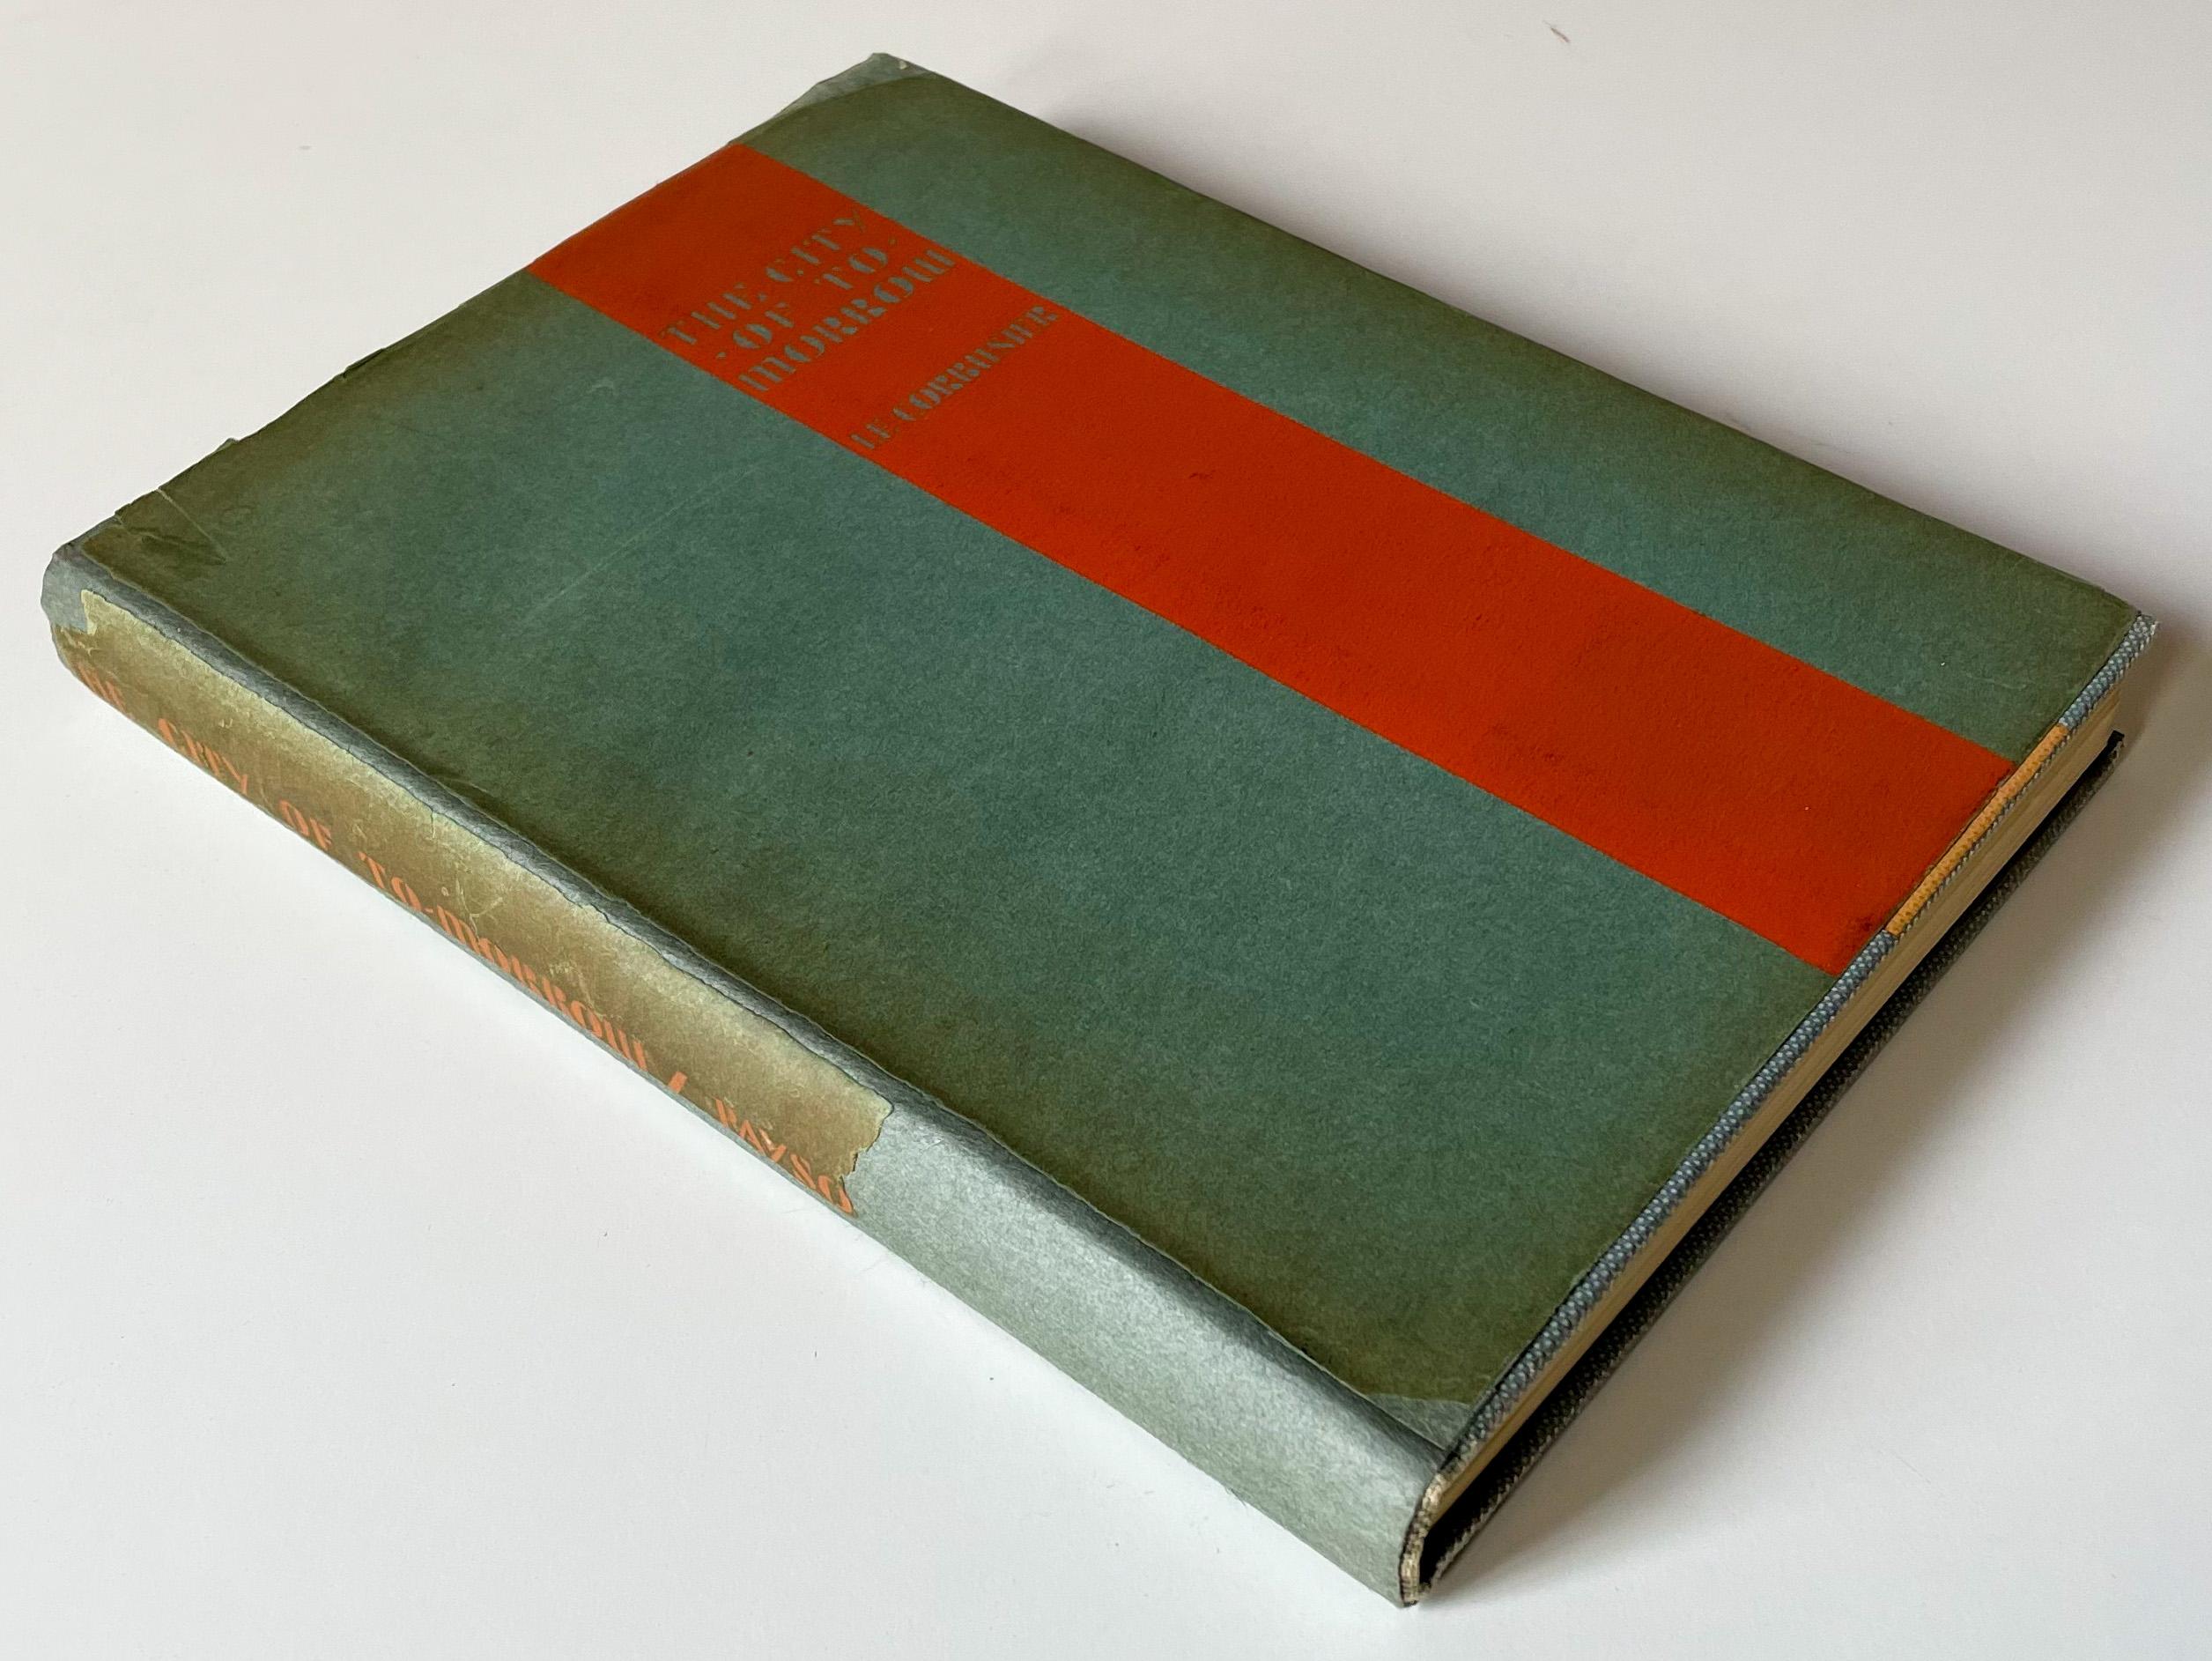 First American edition of Le Corbusier’s authoritative and influential tome on rationalist (read geometric) urban planning, wherein “the author has undertaken a close survey of the existing conditions in our great cities and of their functioning